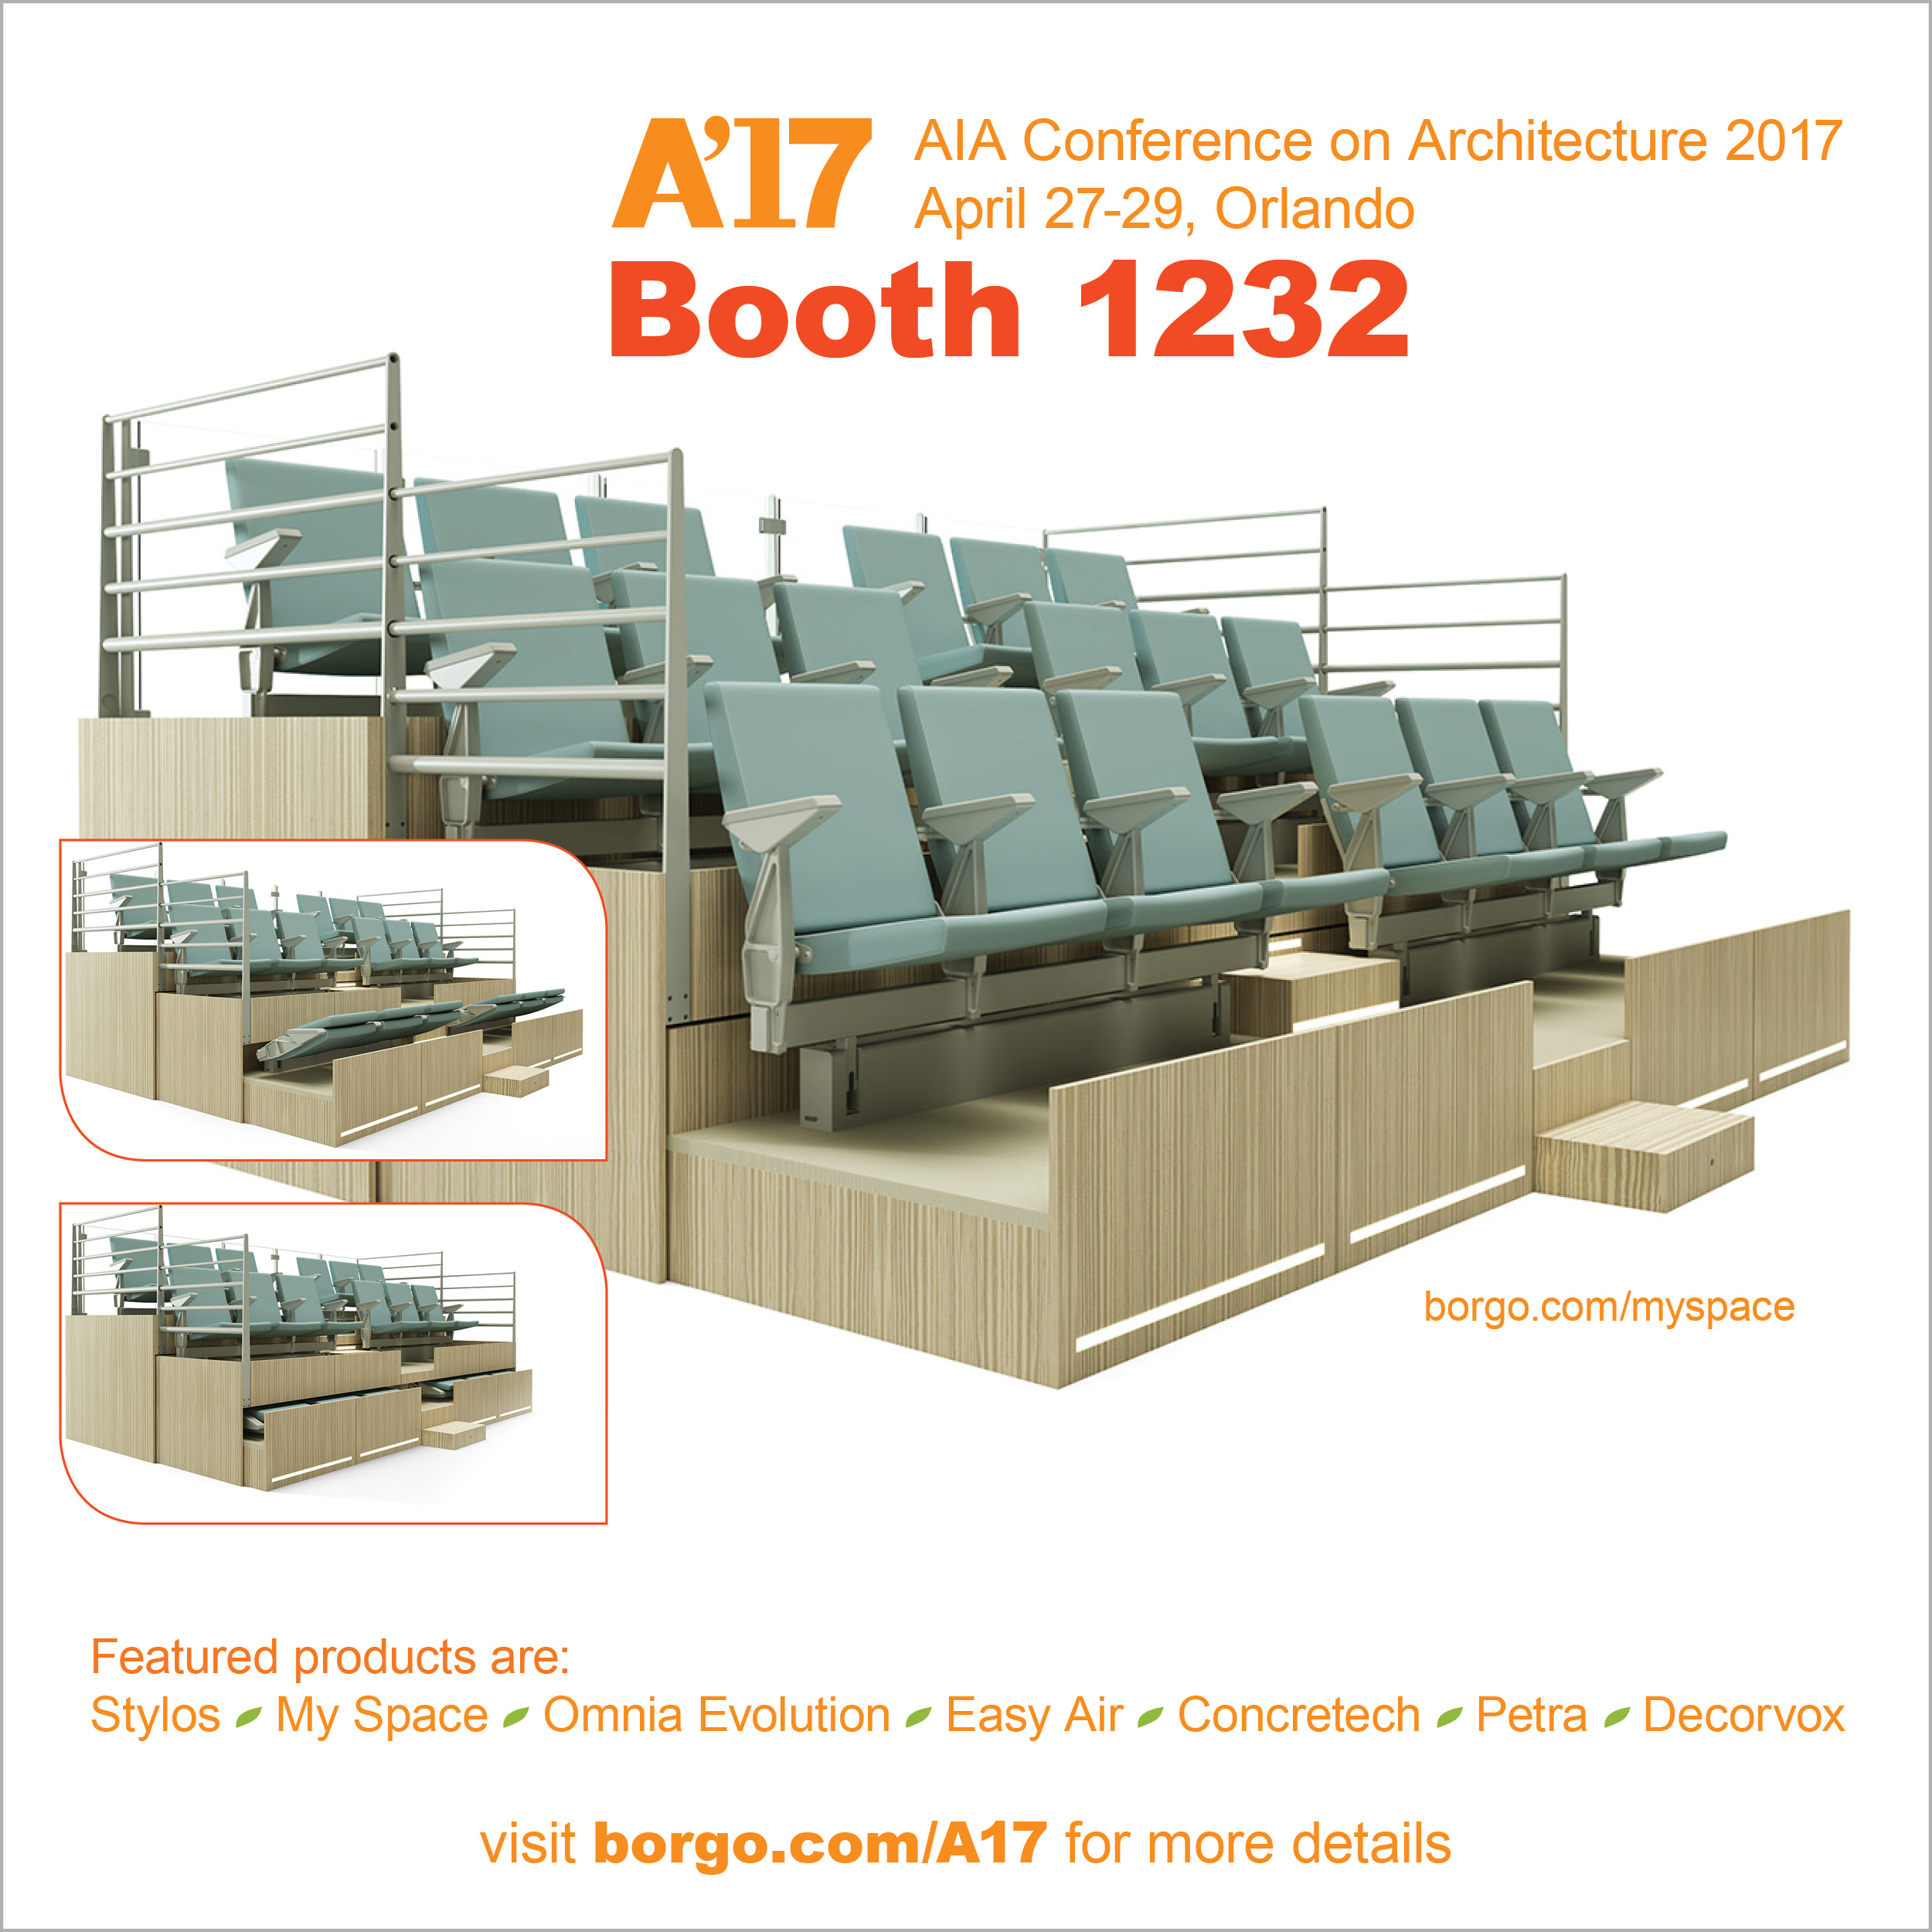 A'17 AIA Conference on Architecture